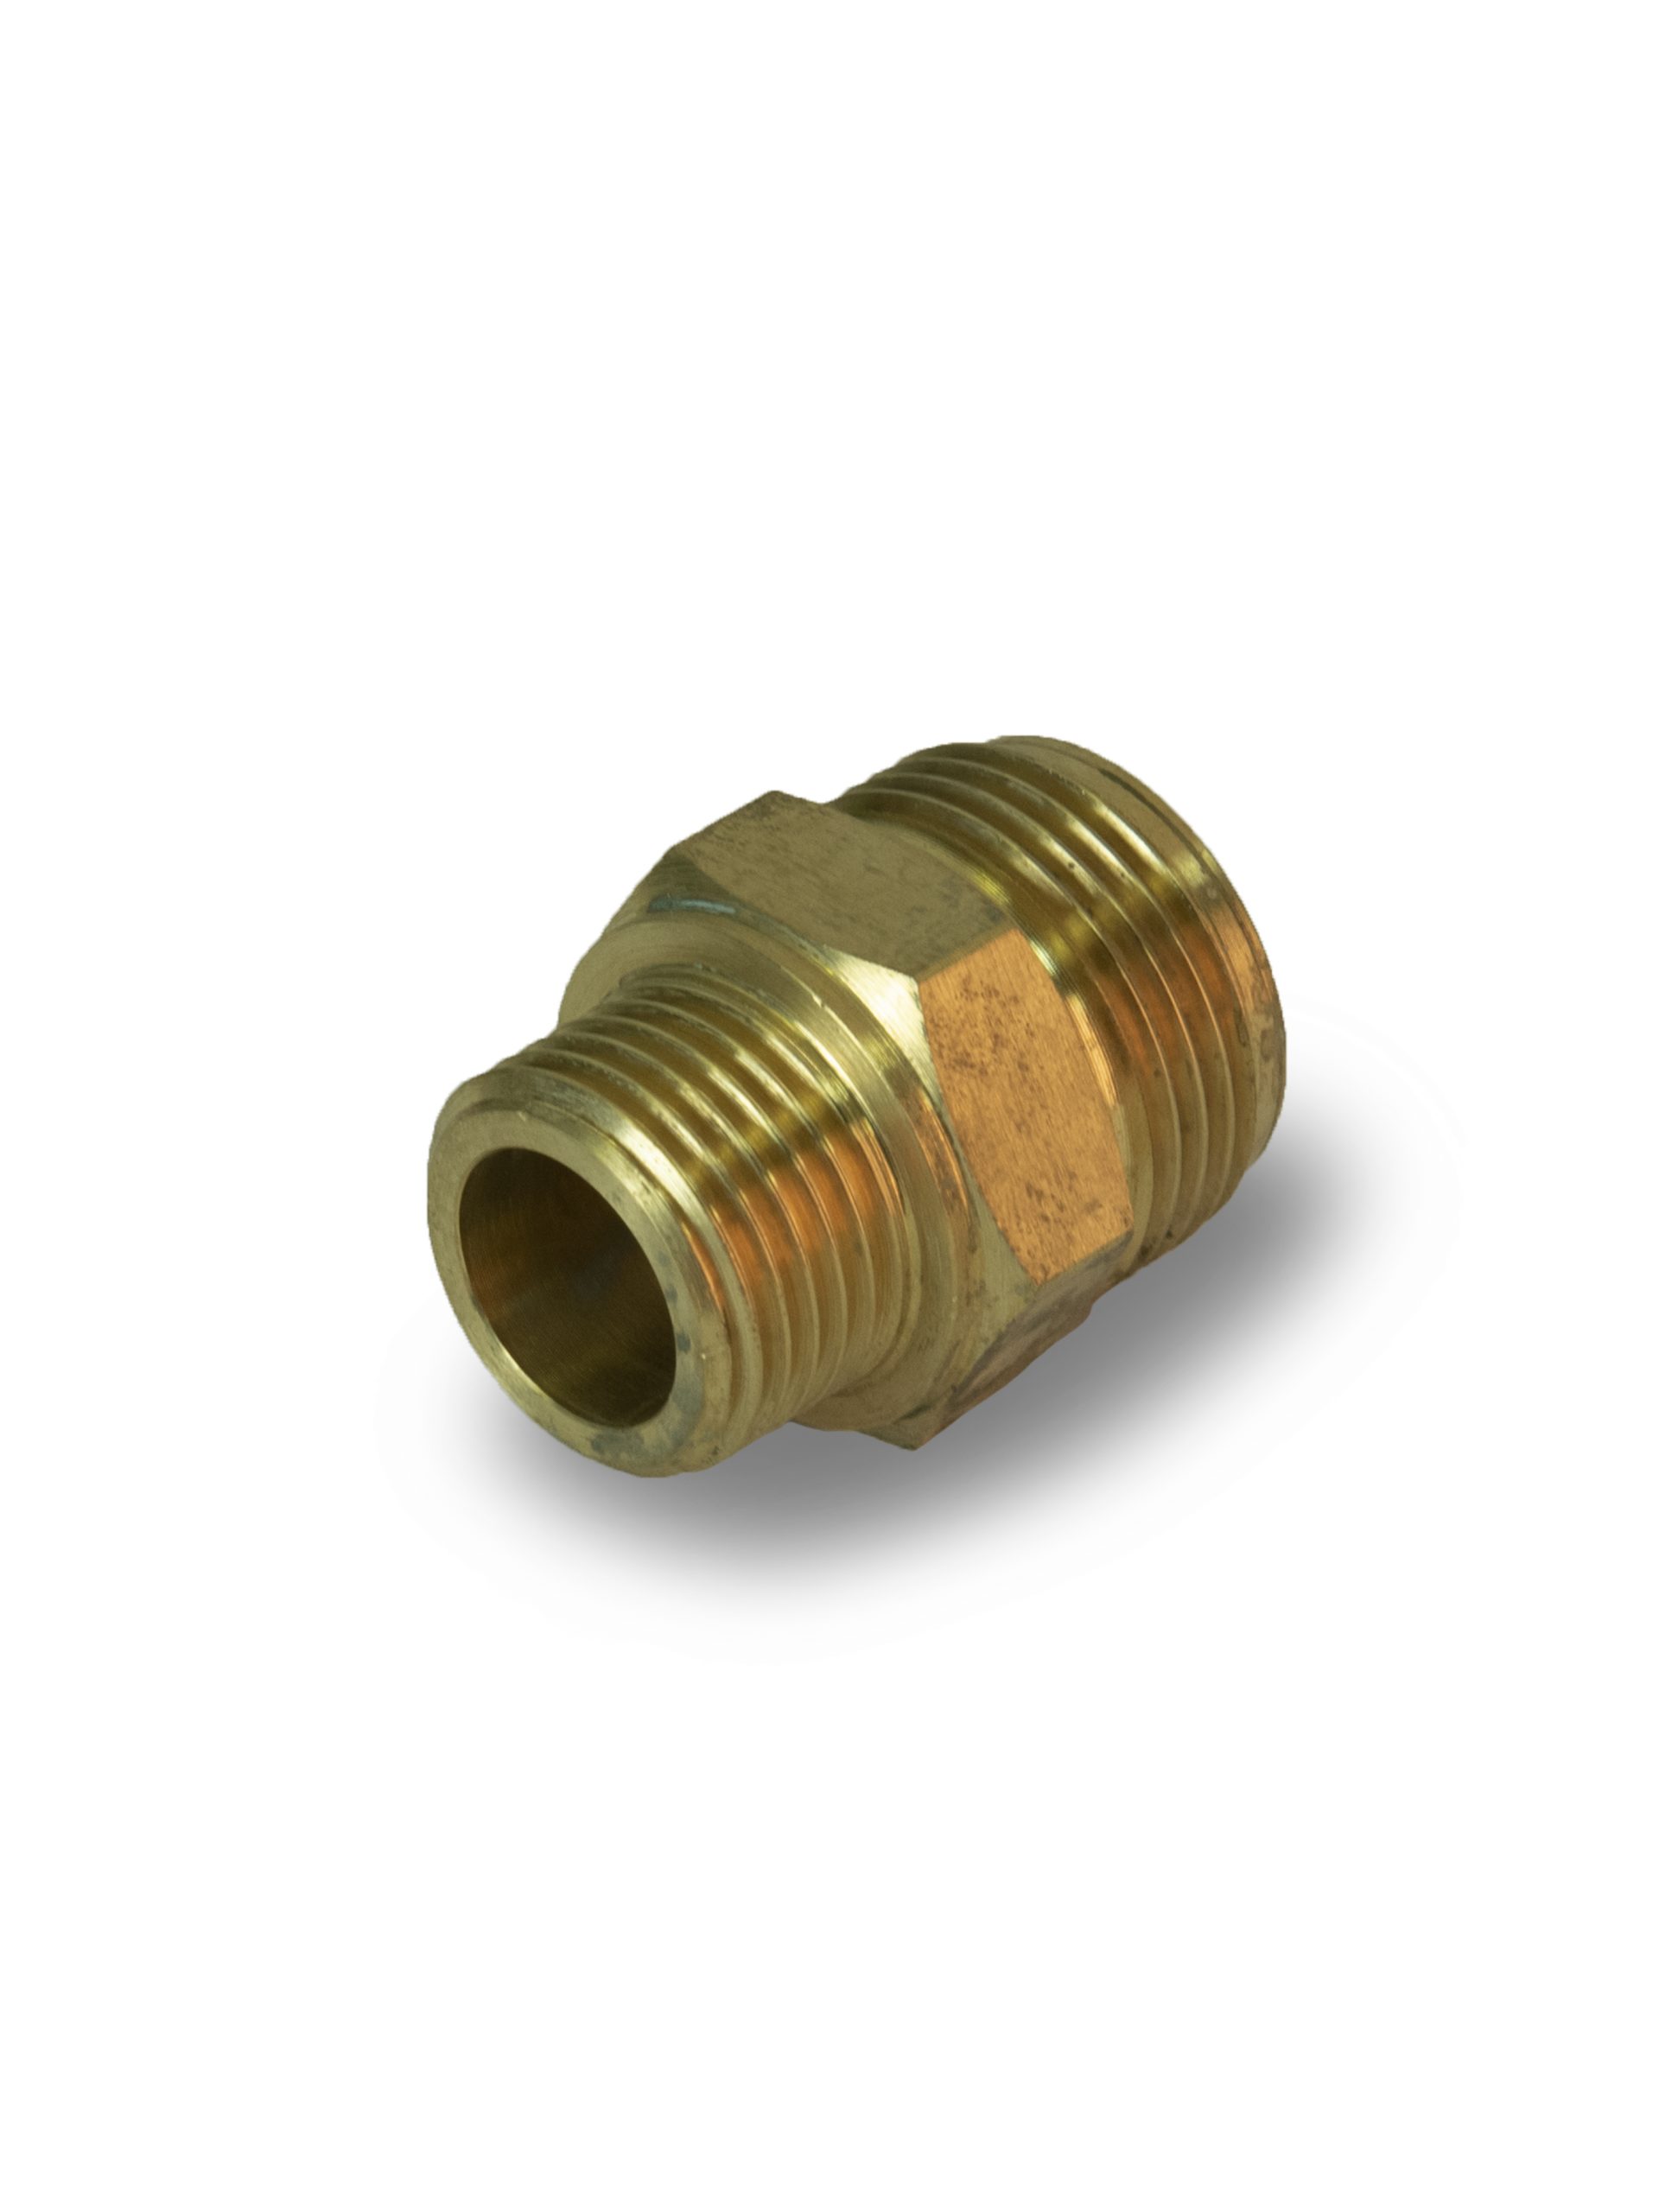 DOUBLE MALE 1/2 Inches X 3/4 Inches COMAP-CLESSE from Gas Equipment Company Llc Abu Dhabi, UNITED ARAB EMIRATES